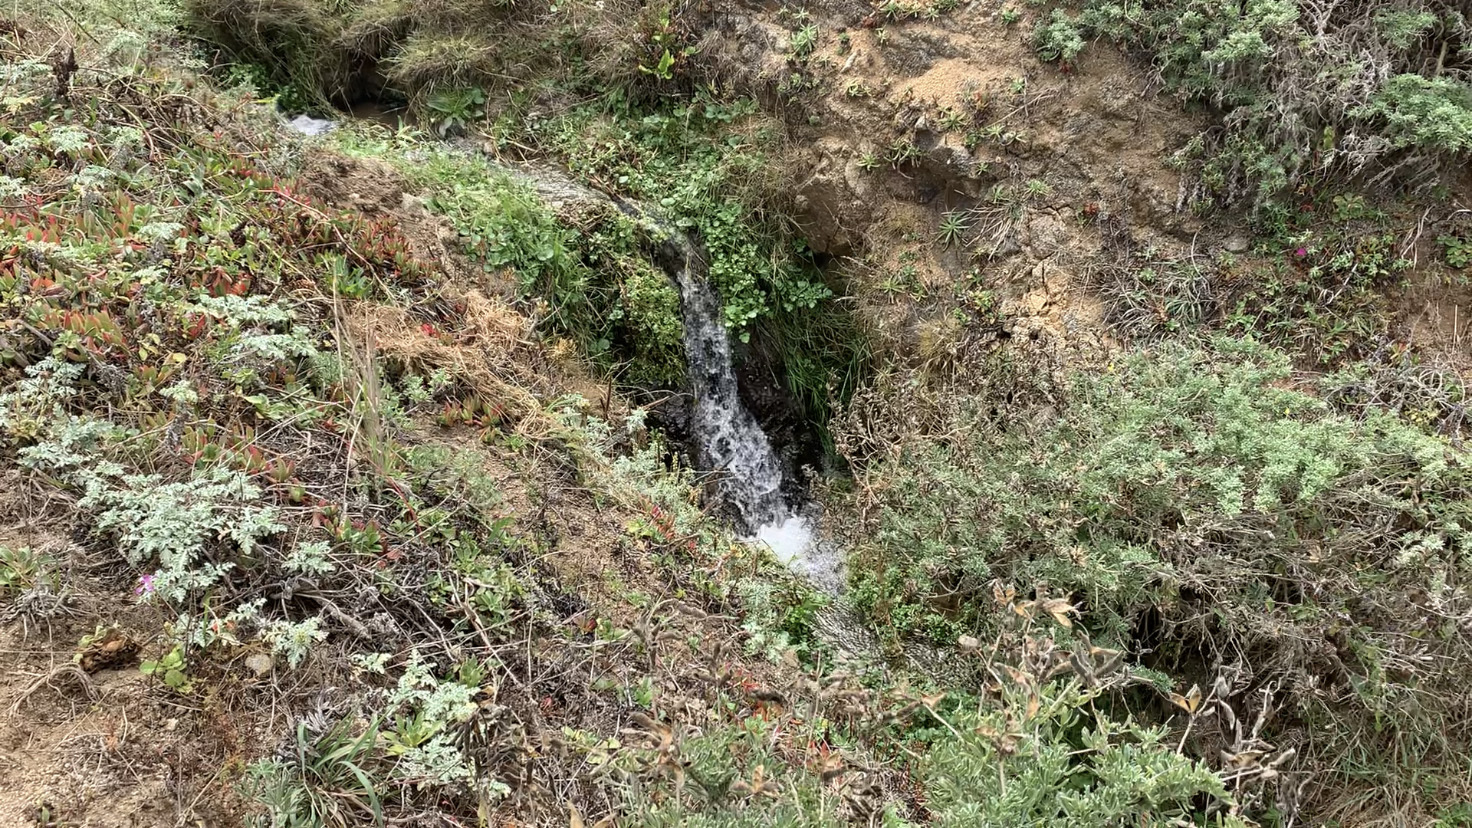 A small waterfall flows over sandy ground with scattered vegetation.